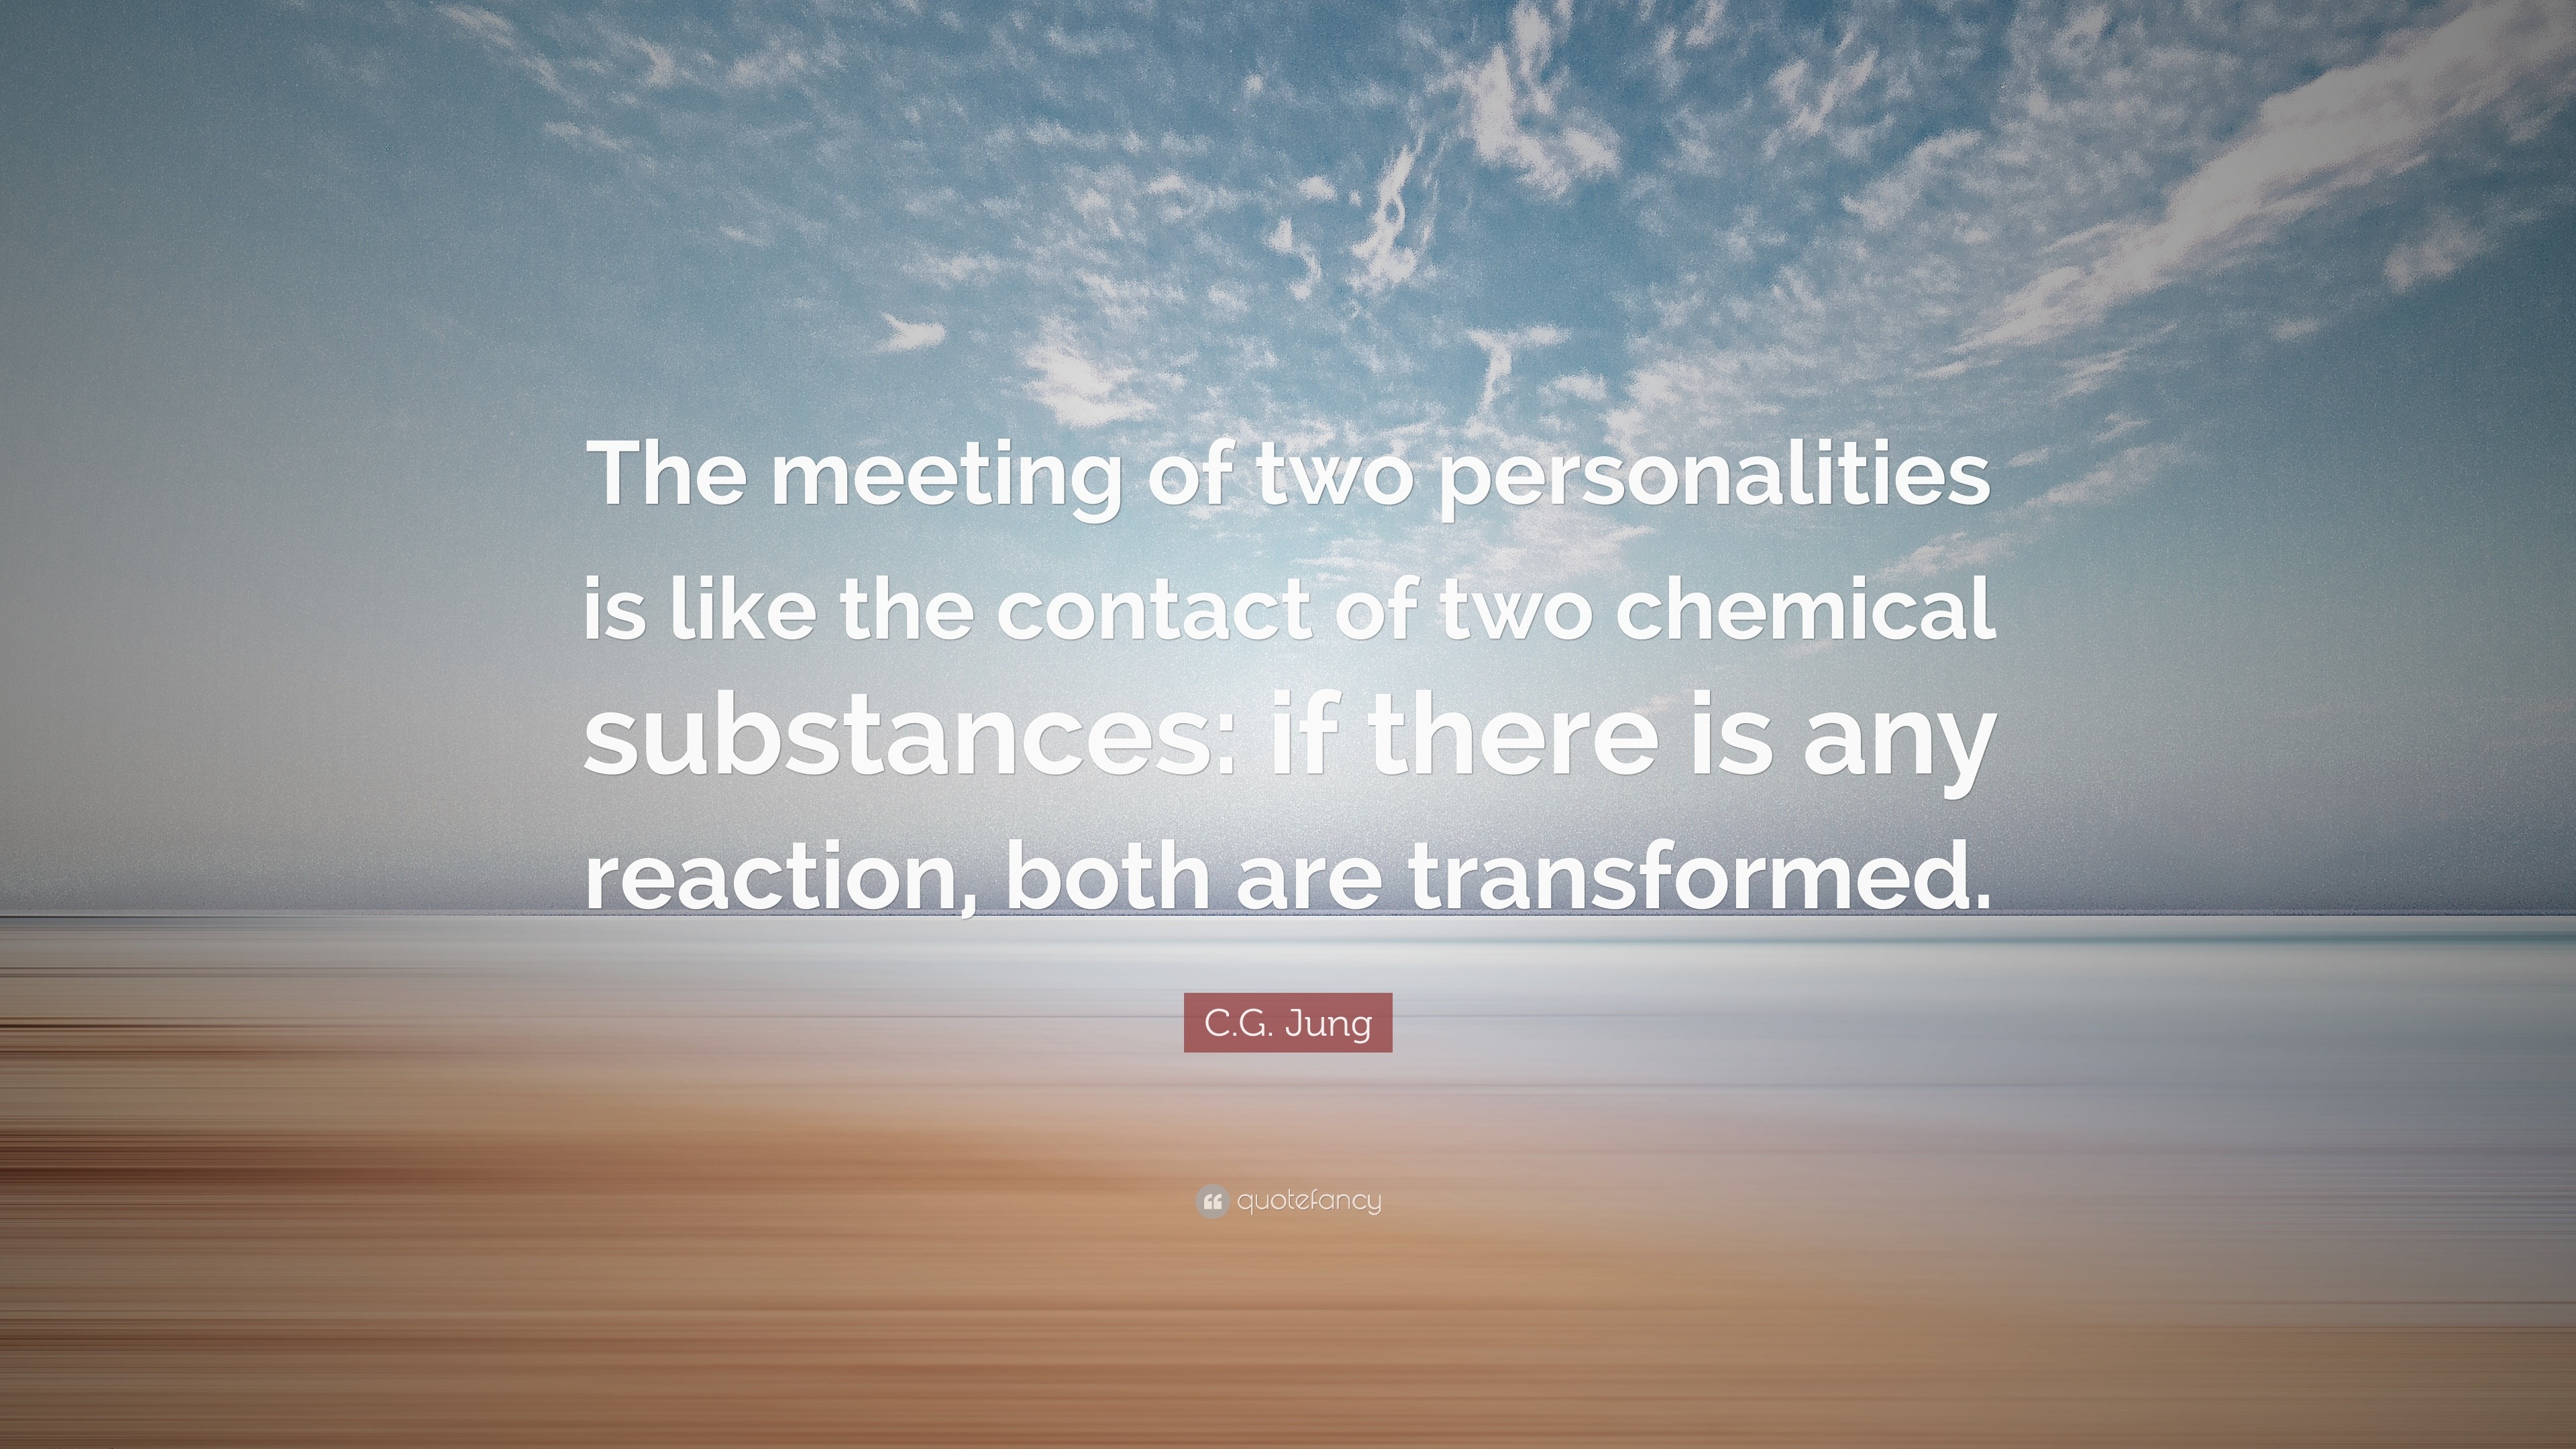 carl jung quotes the meeting of two personalities